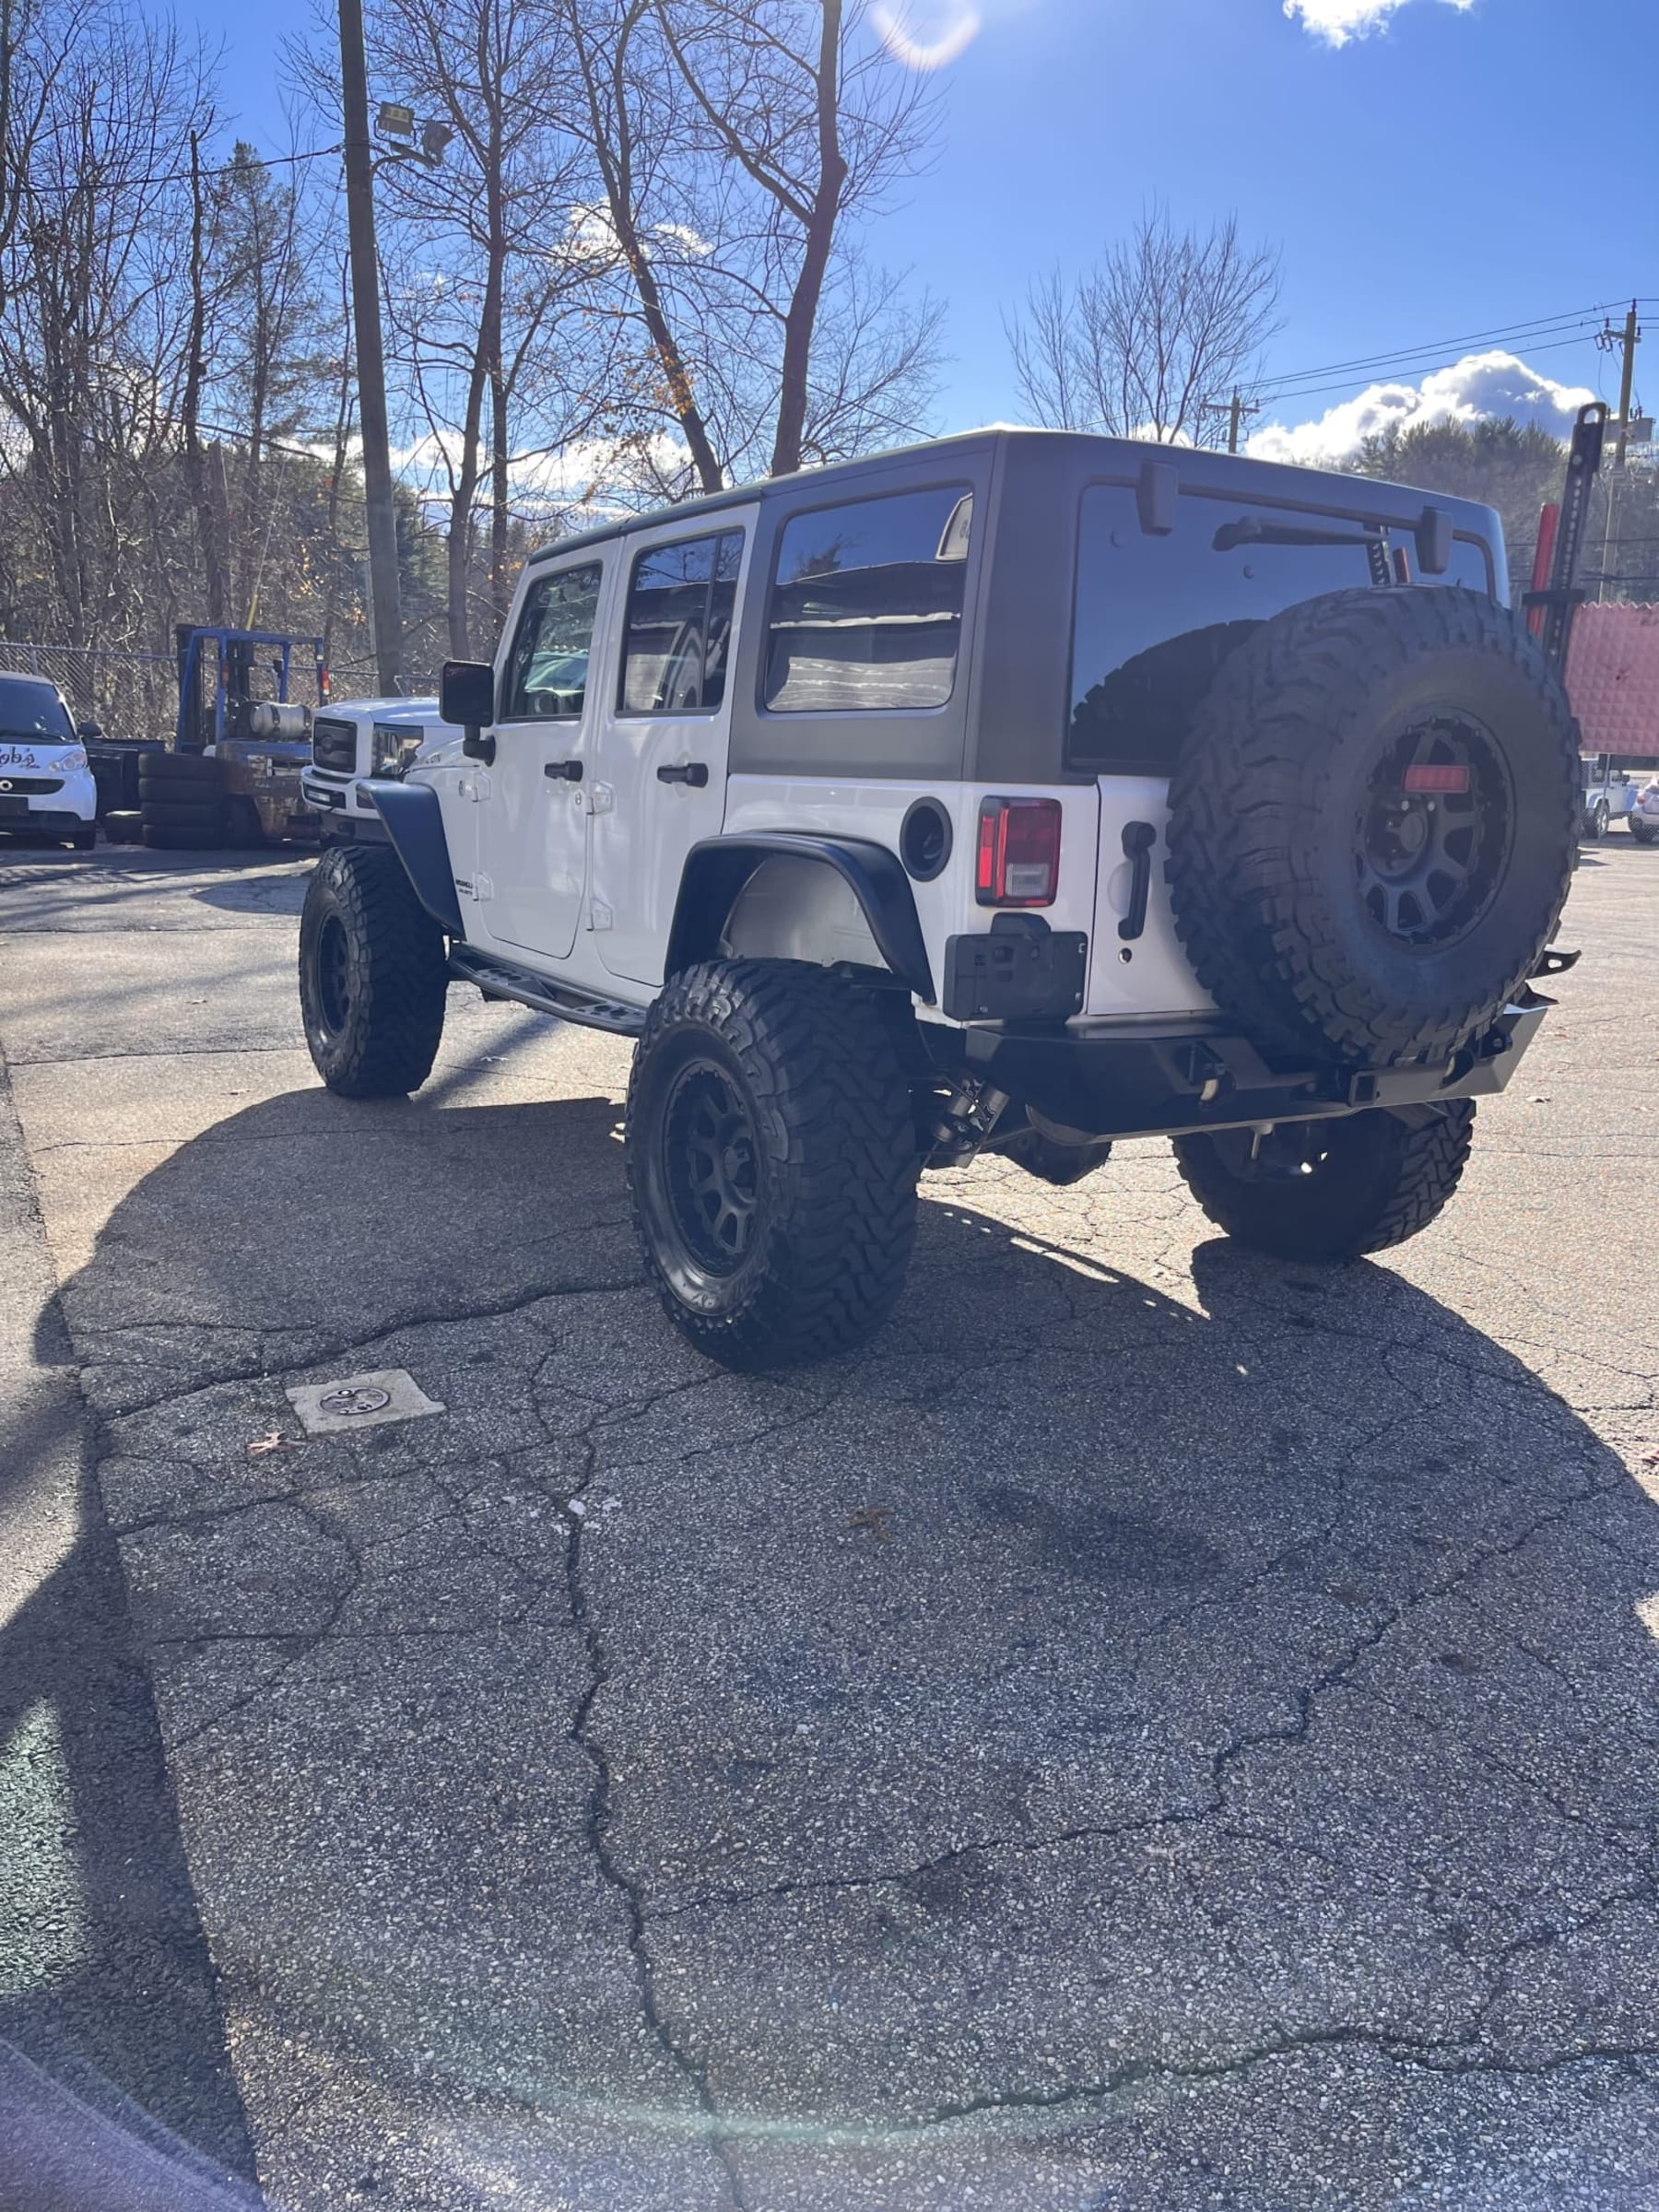 New Arrival!! 2017 Jeep Wrangler Unlimited Rubicon!! One Owner! Clean Carfax!! ONLY 18k MILES!! Heated Leather Seats, Remote Start, Alpine Premium 9-Speakers with All Weather Subwoofer!! Thousands of dollars in upgrades!! Won’t last at only $35,900!